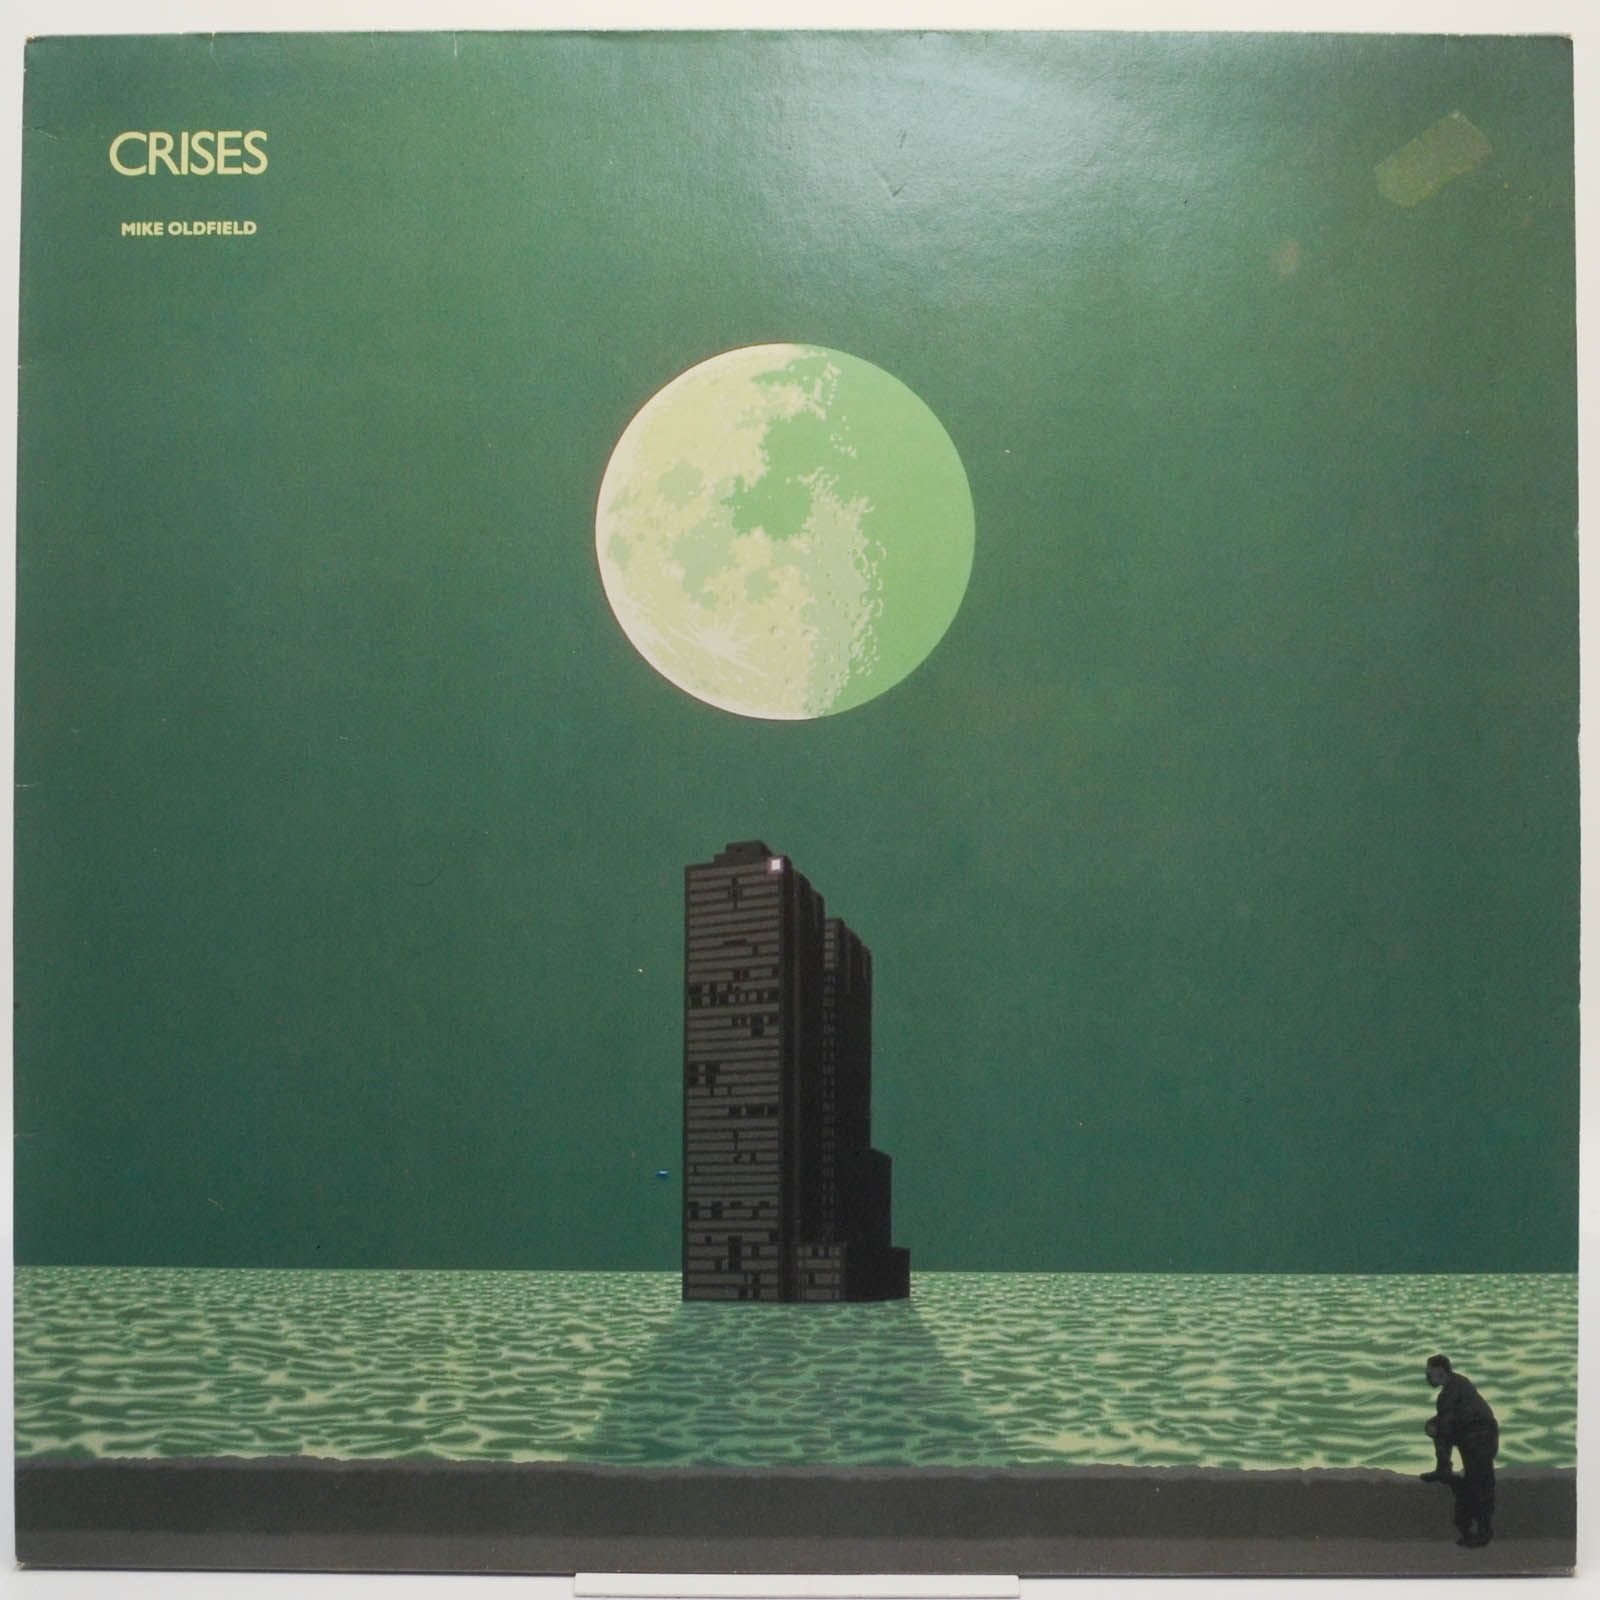 Mike Oldfield — Crises, 1983